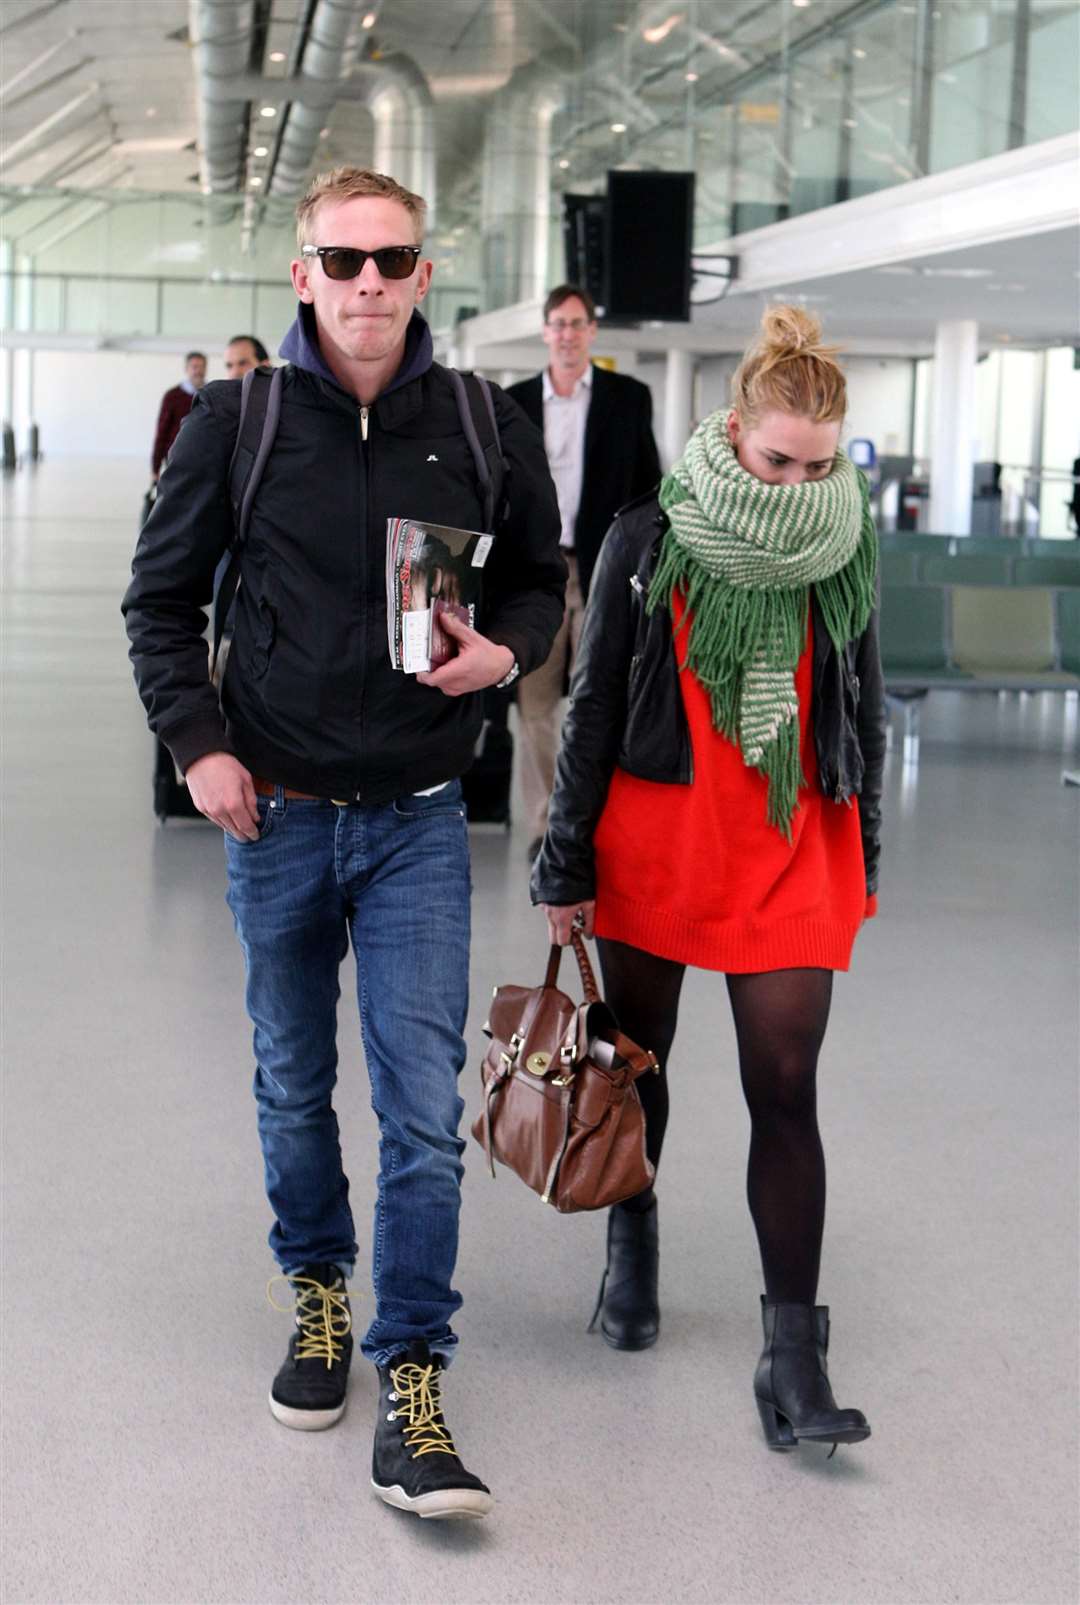 Billie Piper was worried about the couple’s two children after the tweets, the High Court heard (Steve Parsons/PA)